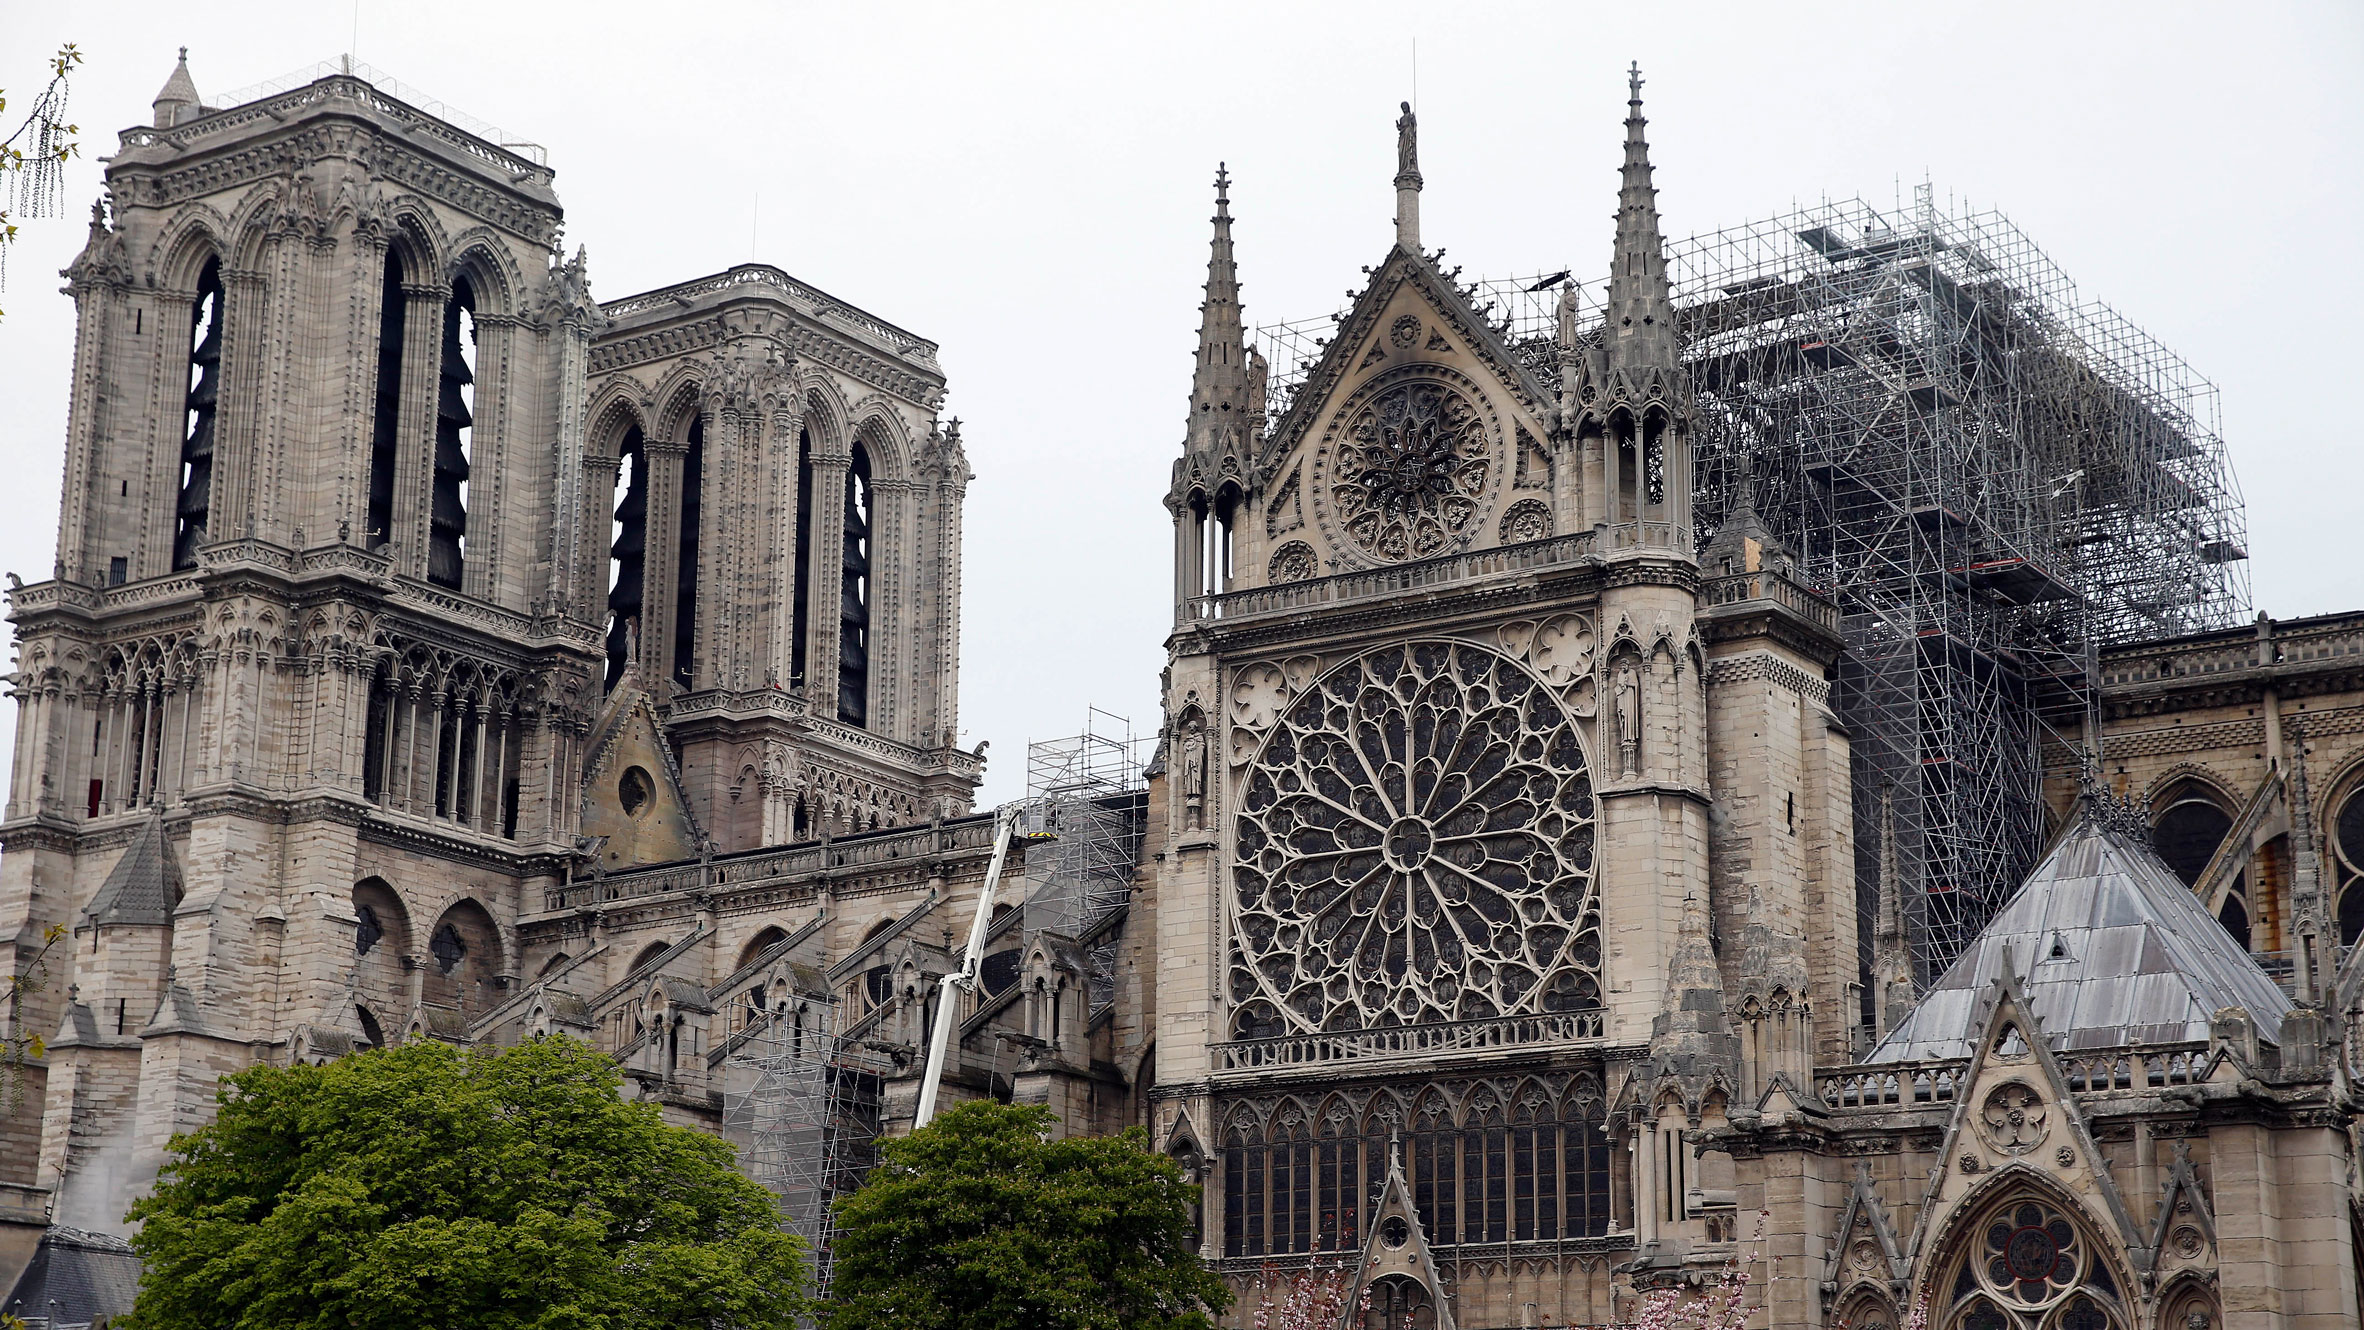 The past & future of Notre-Dame